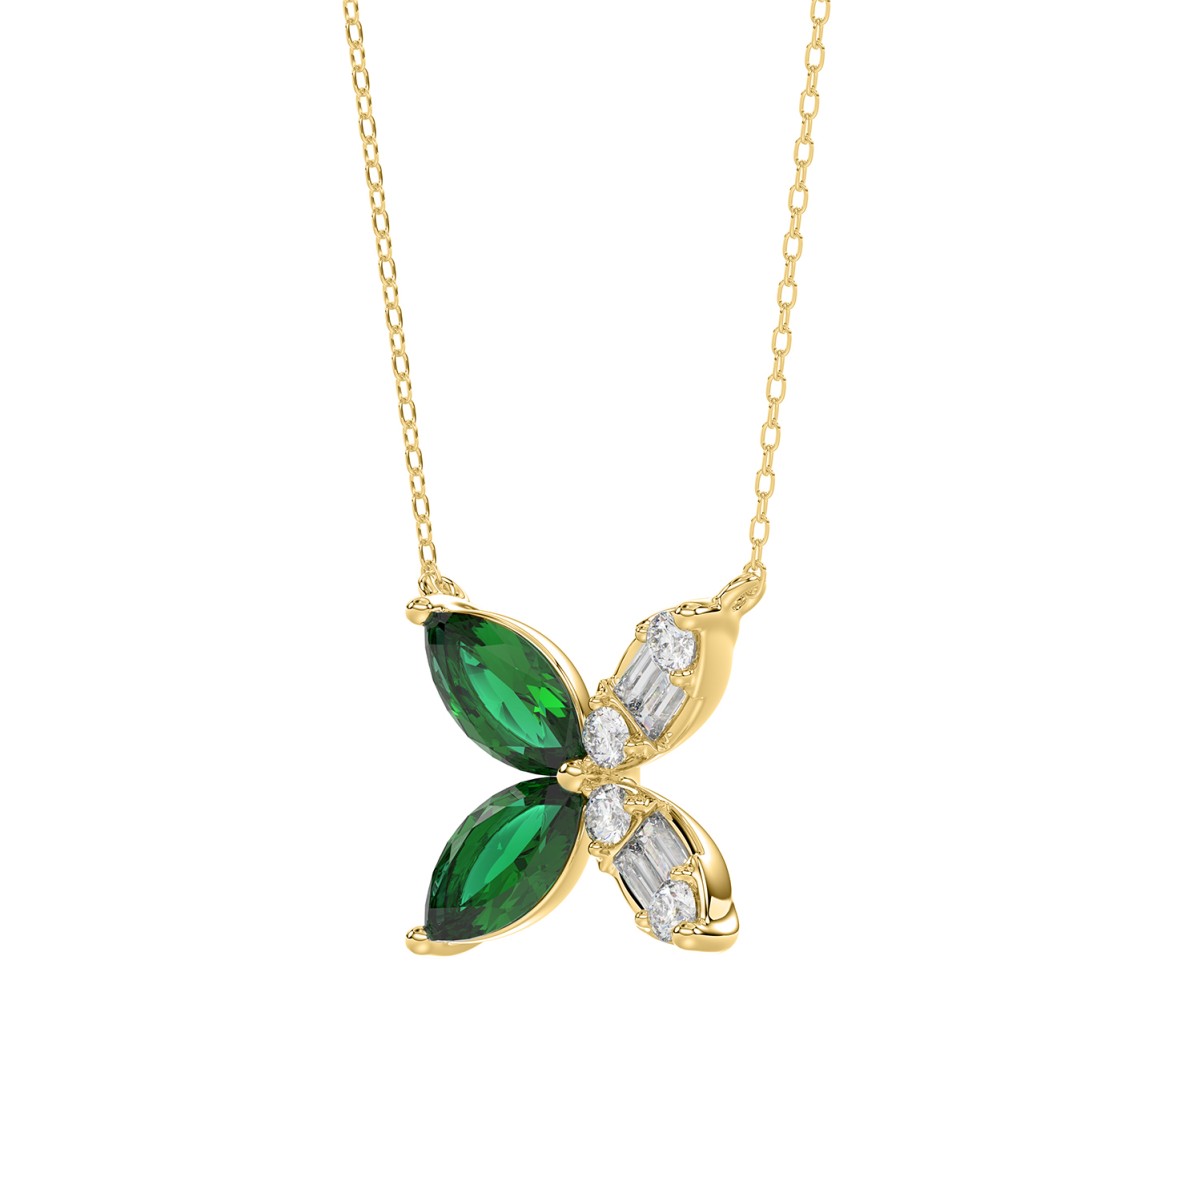 14K YELLOW GOLD 1 3/4CT ROUND/BAGUETTE/MARQUISE DIAMOND LADIES PENDANT WITH CHAIN(COLOR STONE MARQUISE GREEN EMERALD DIAMOND 1 5/8CT)